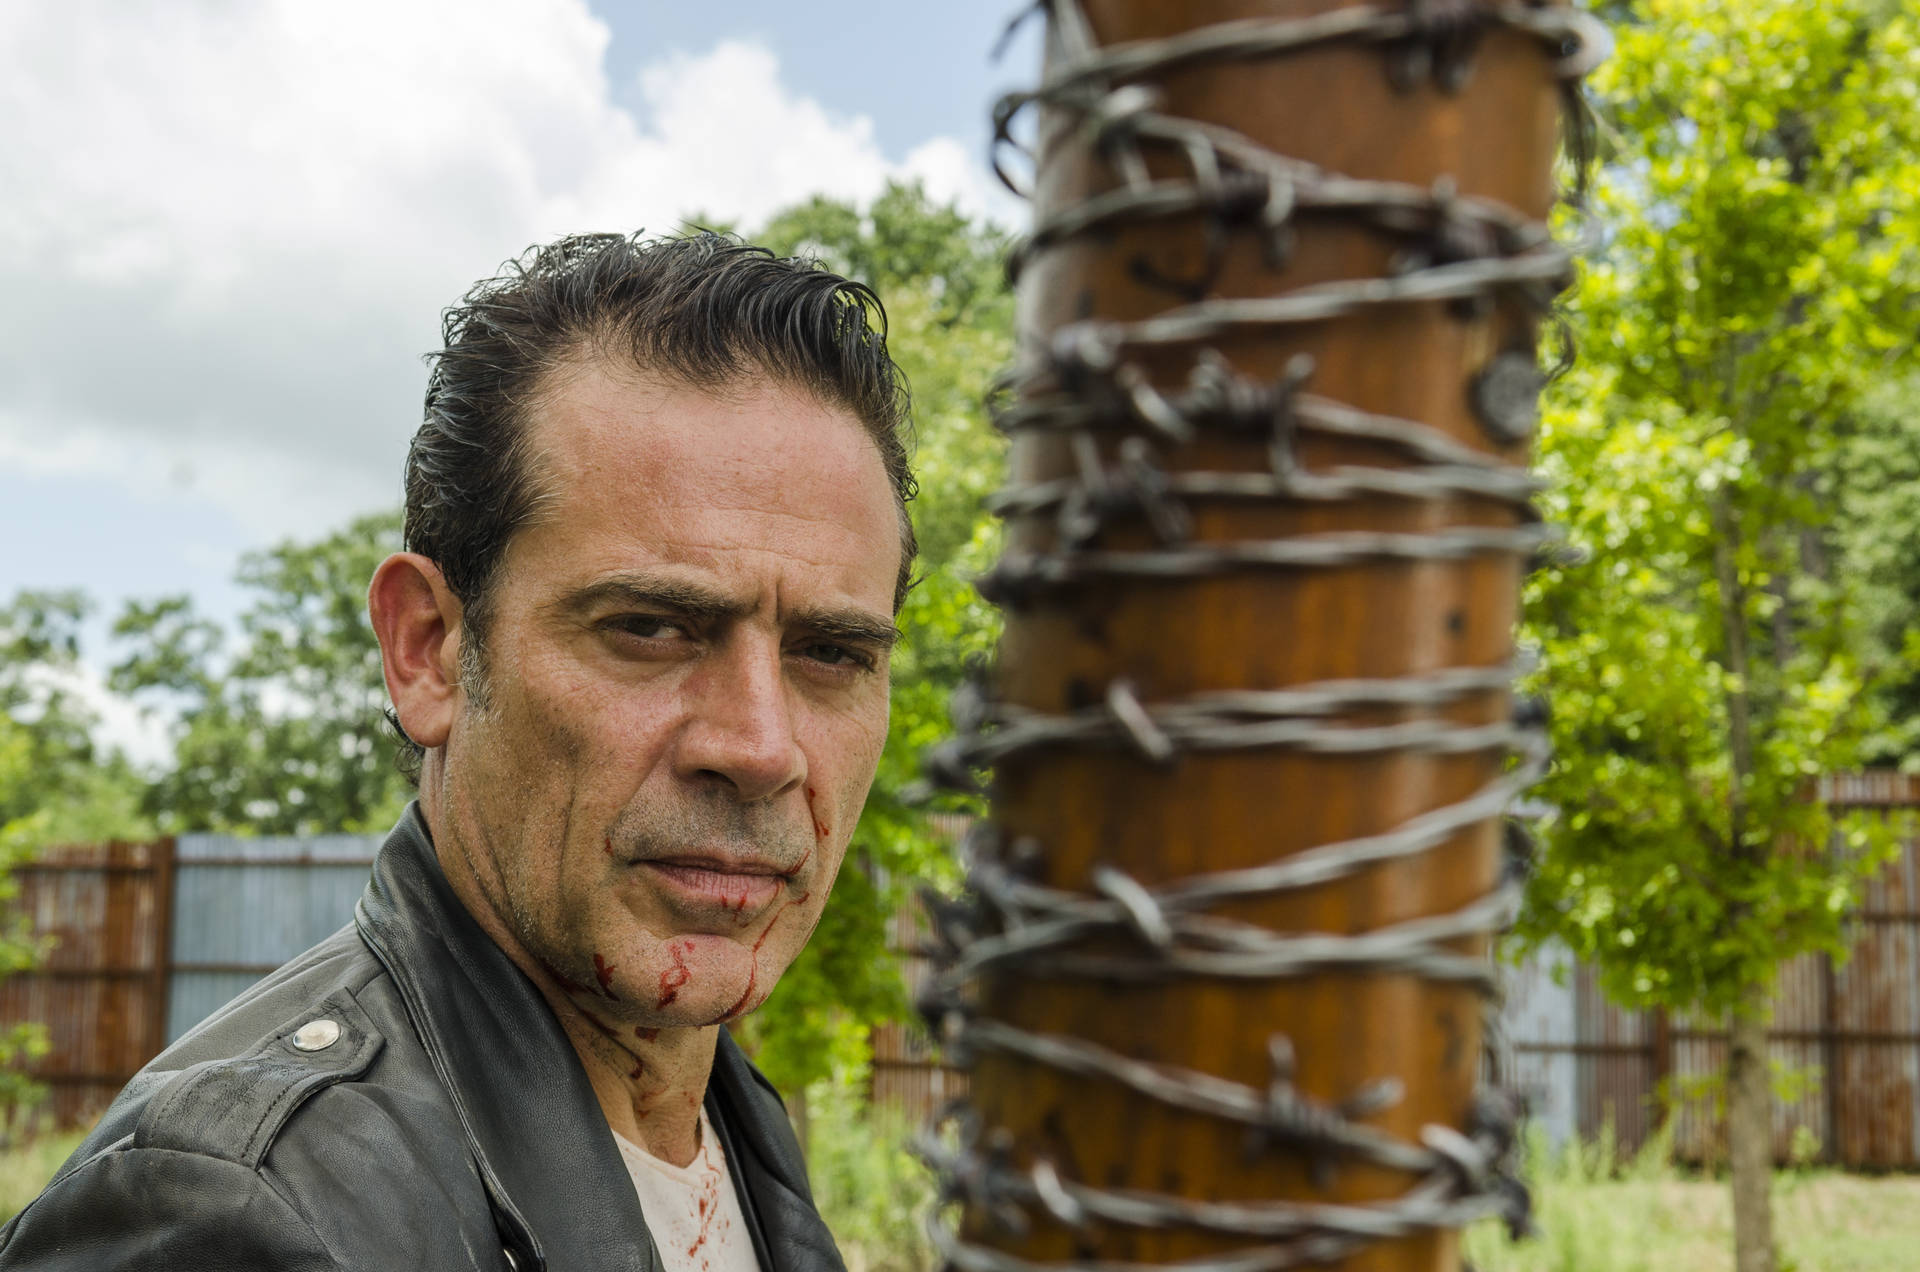 Negan's Bat Wrapped With Barbed Wire Background